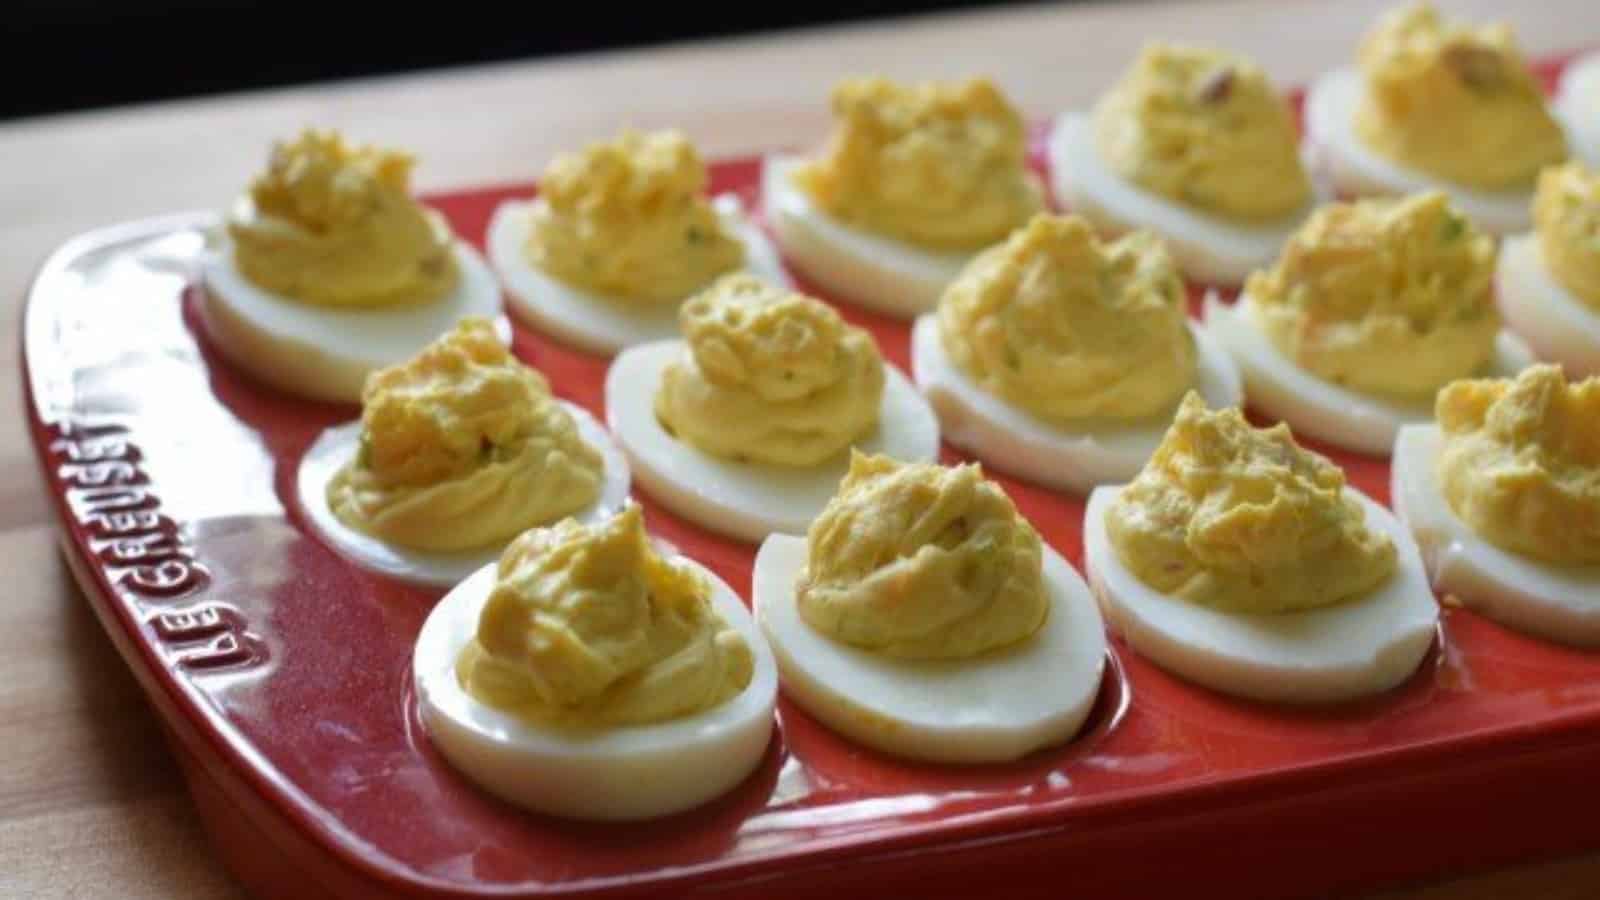 Image shows bacon deviled eggs in a red tray.